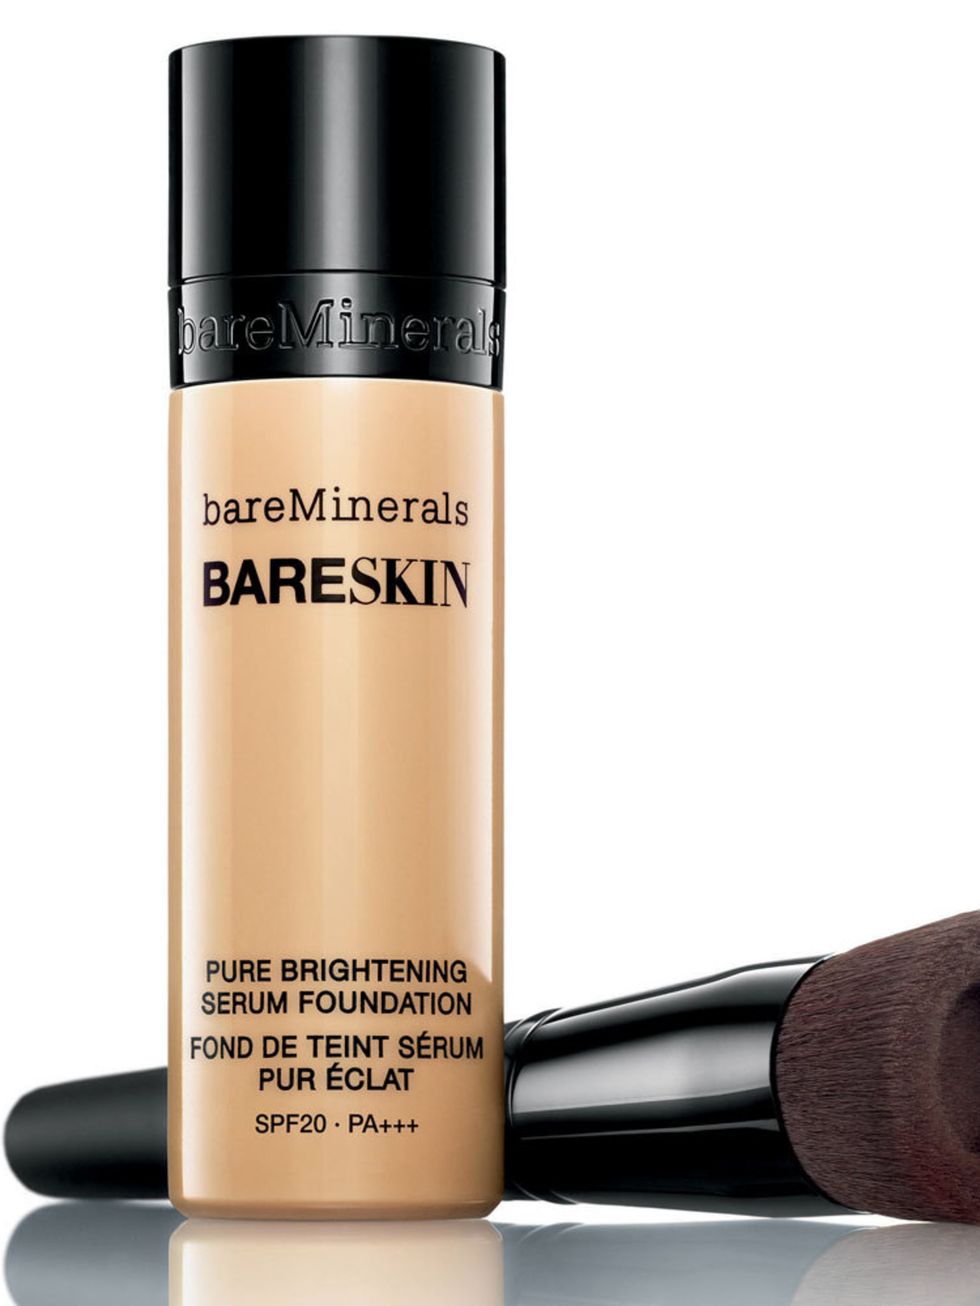 <p><a href="http://www.bareminerals.co.uk/bareSkin-Pure-Brightening-Serum-Foundation-SPF20/UKmasterbareskin,en_GB,pd.html">bareMinerals bareSkin Pure Brightening Serum Foundation, £26</a></p>

<p>A natural looking base calls for an ultra-thin foundation w